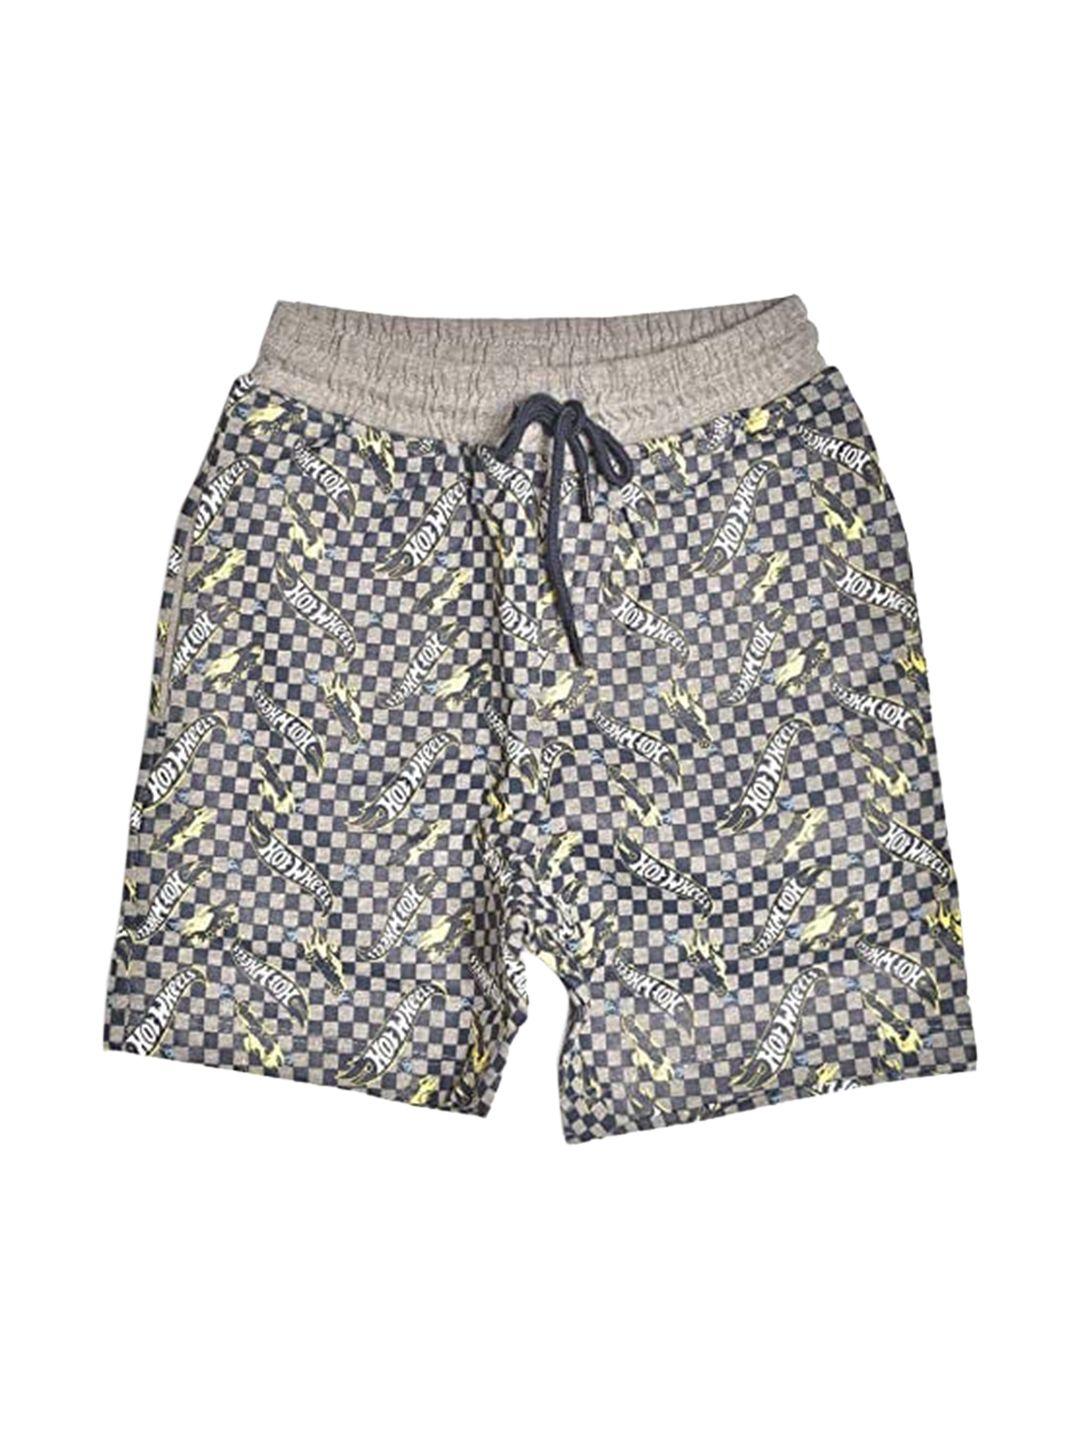 toothless boys navy blue printed shorts